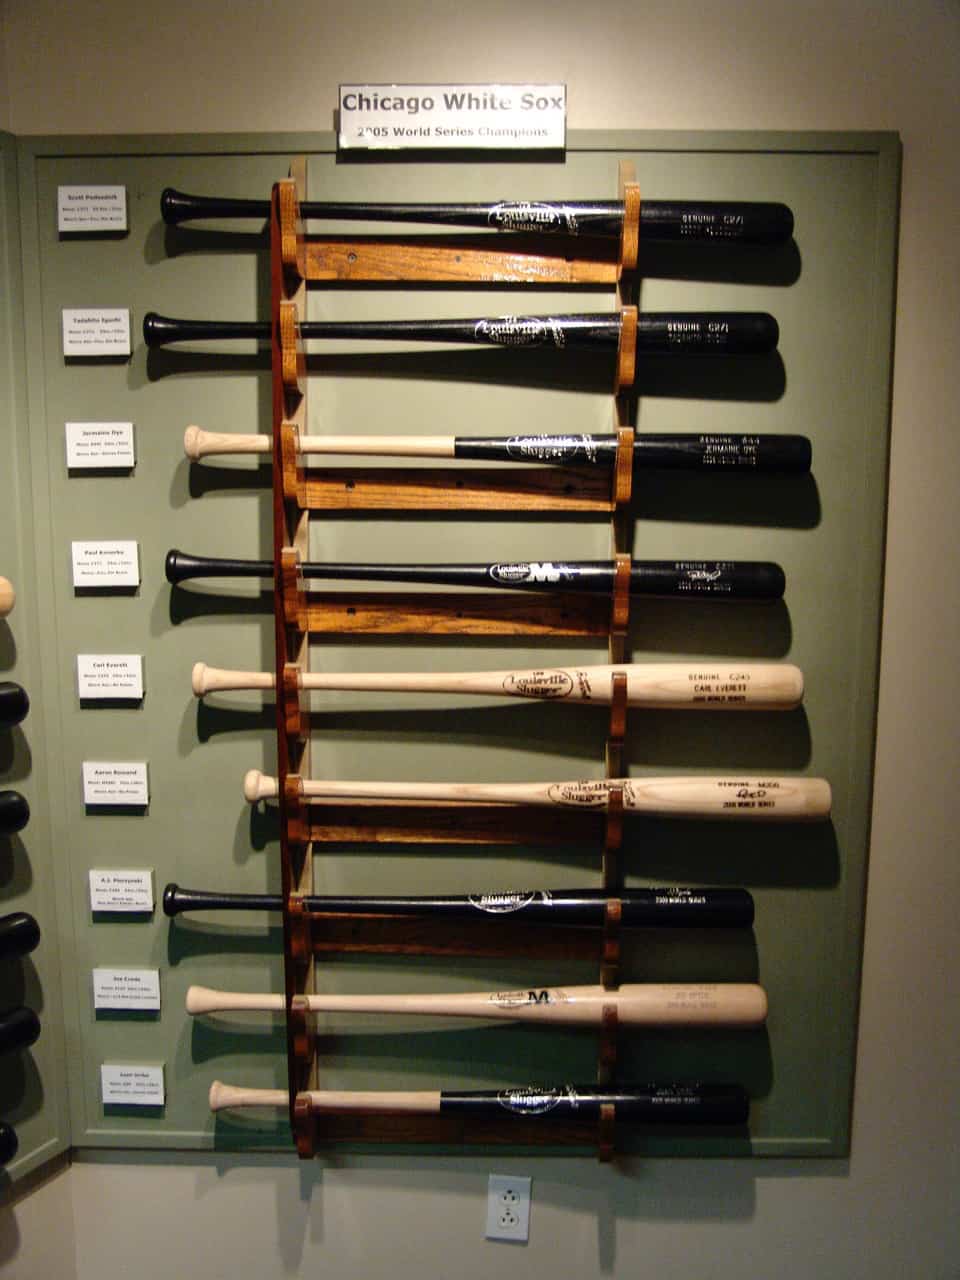 Bats used by the 2005 Chicago White Sox at the Louisville Slugger Museum in Louisville, Kentucky